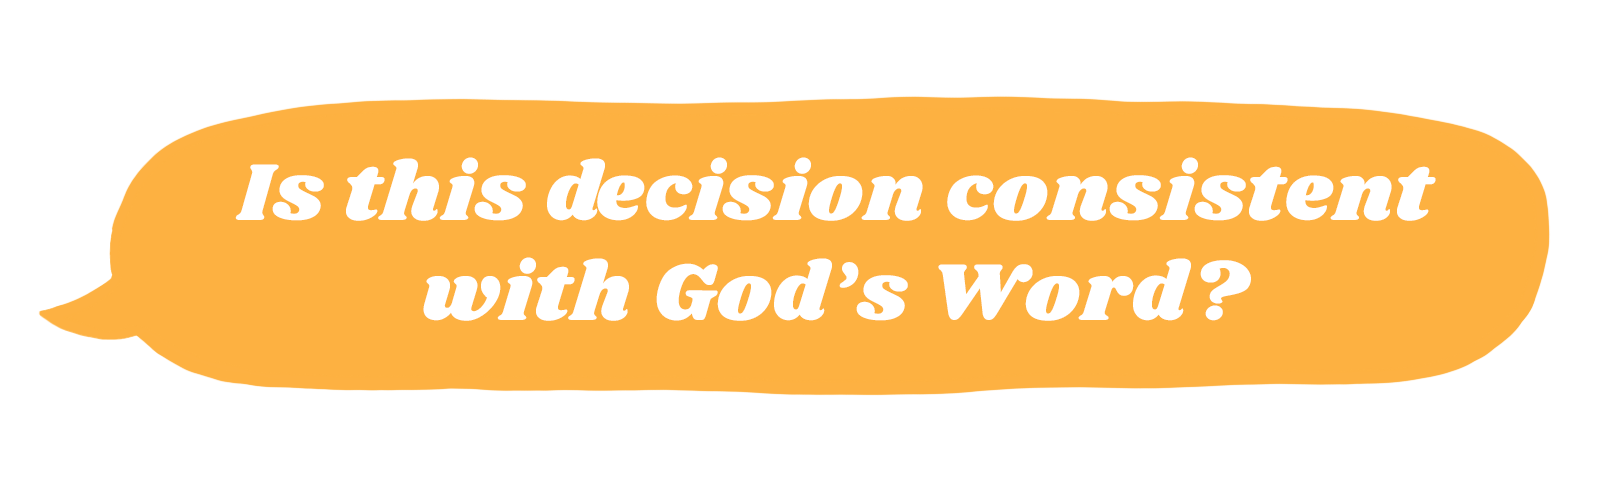 Is this decision consistent with God’s Word?